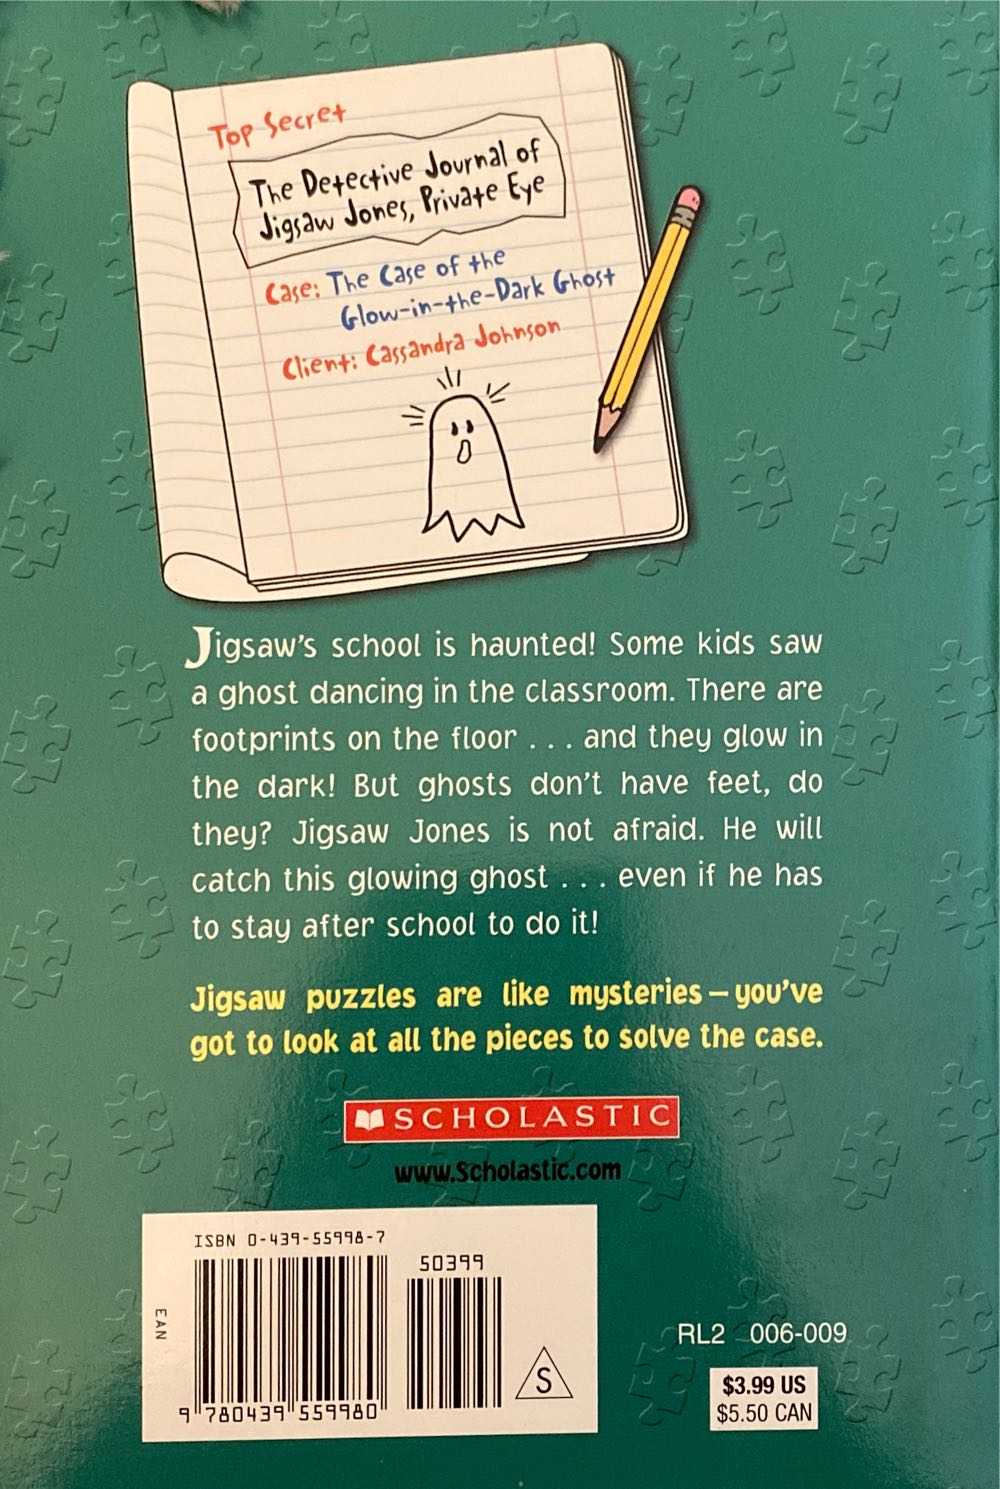 Jigsaw Jones: The Case Of The Glow-in-the-Dark Ghost - James Preller (Scholastic Inc. - Paperback) book collectible [Barcode 9780439559980] - Main Image 2